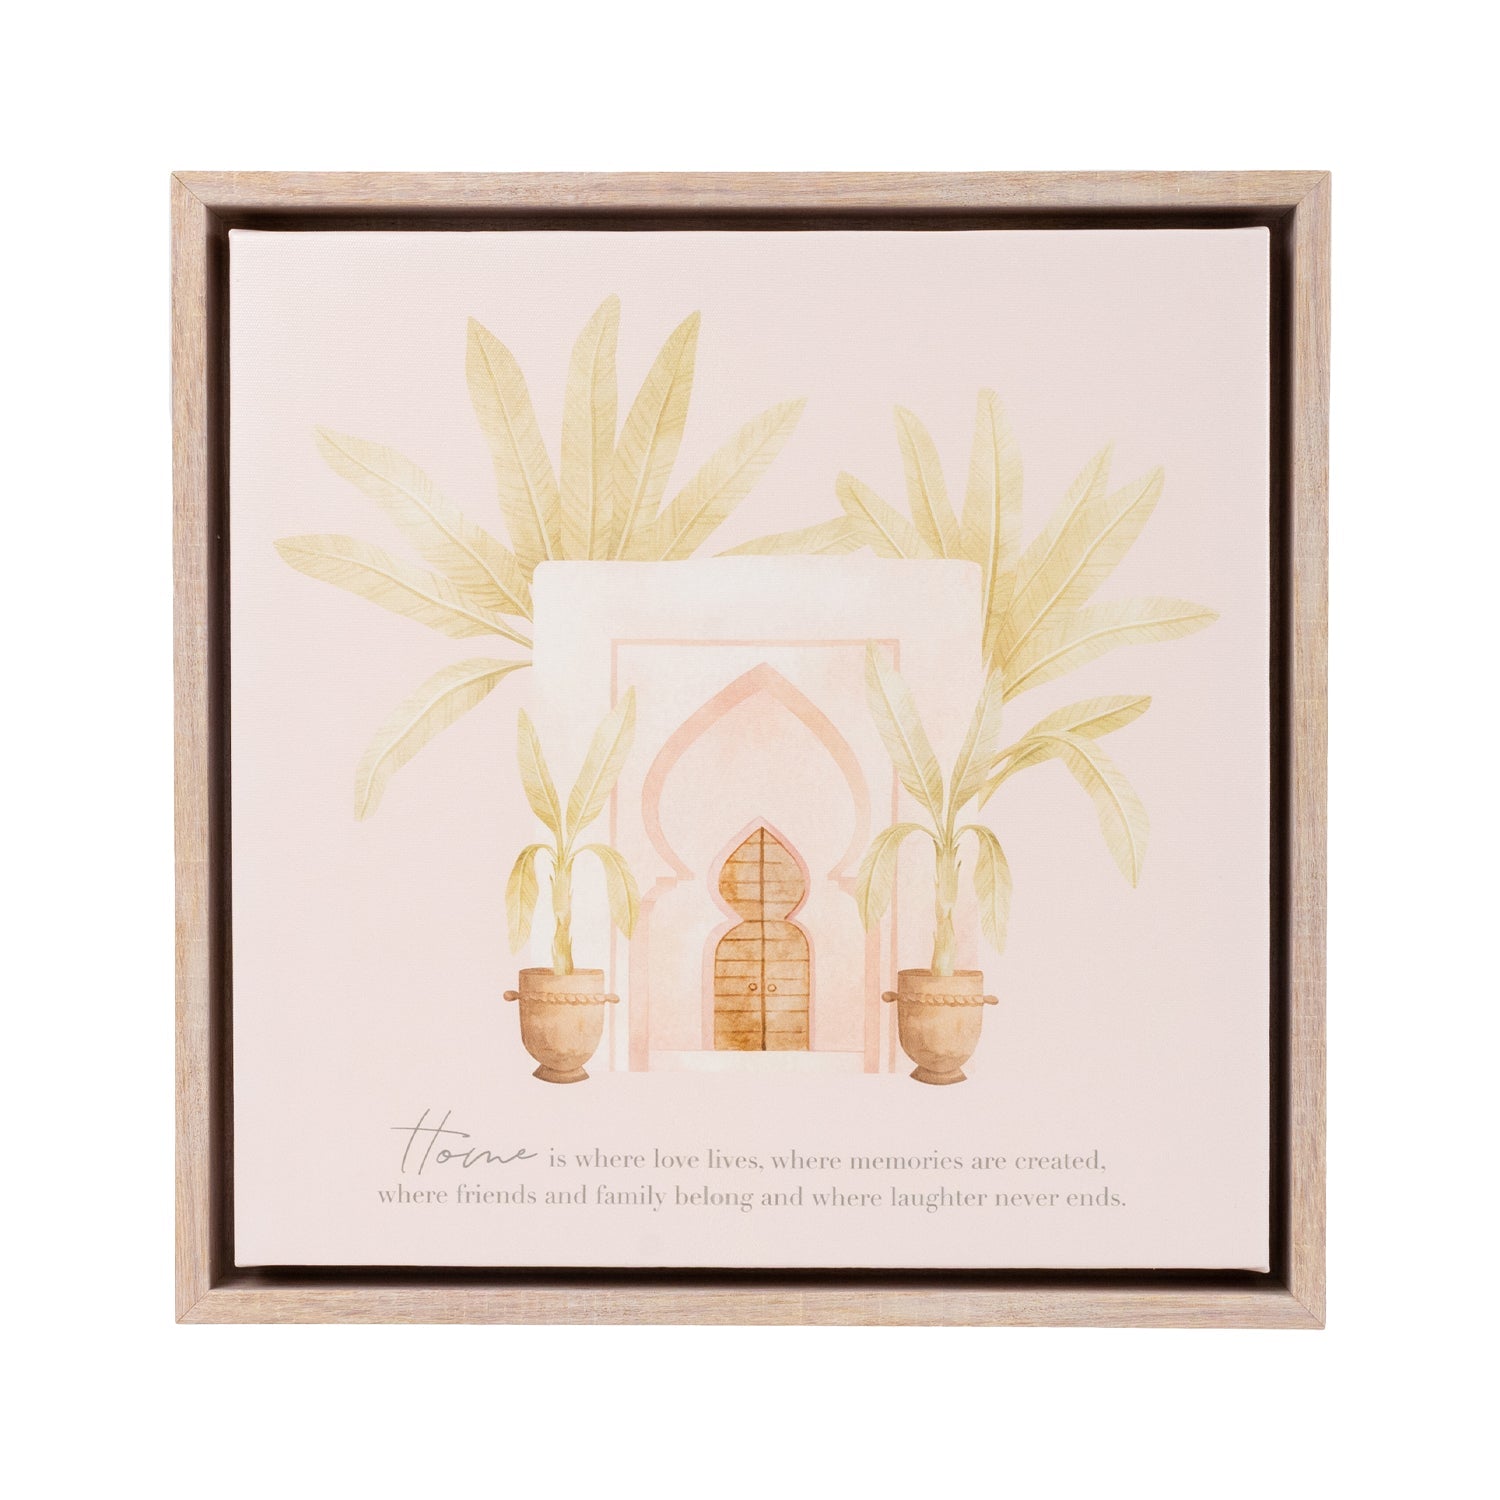 Wood look framed canvas with beautiful home print, verse and hooks for hanging